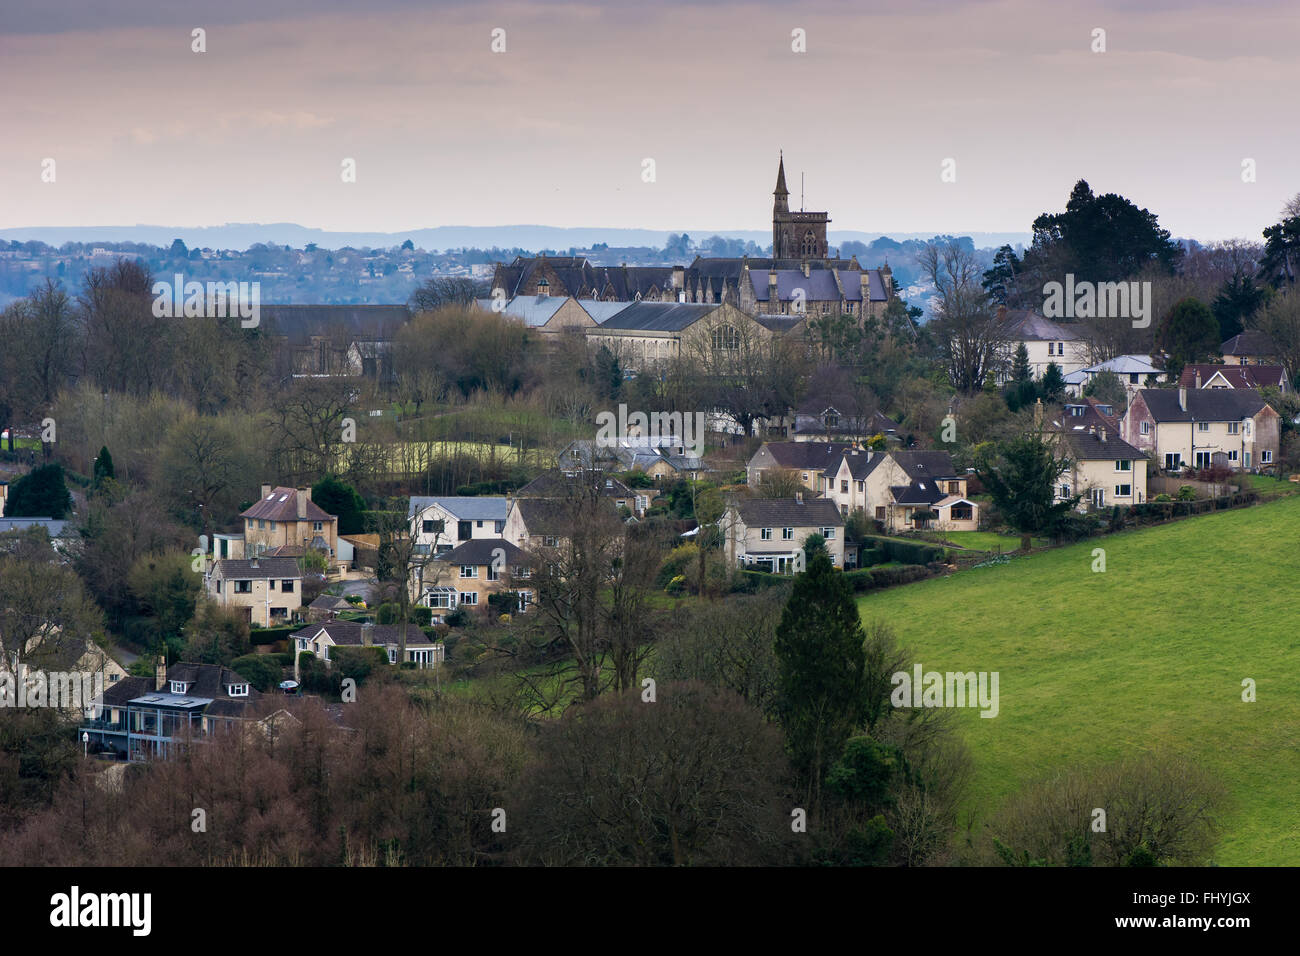 View of North East Bath, seen from Charlcombe. The Royal High School dominates a residential landscape in Bath, England Stock Photo